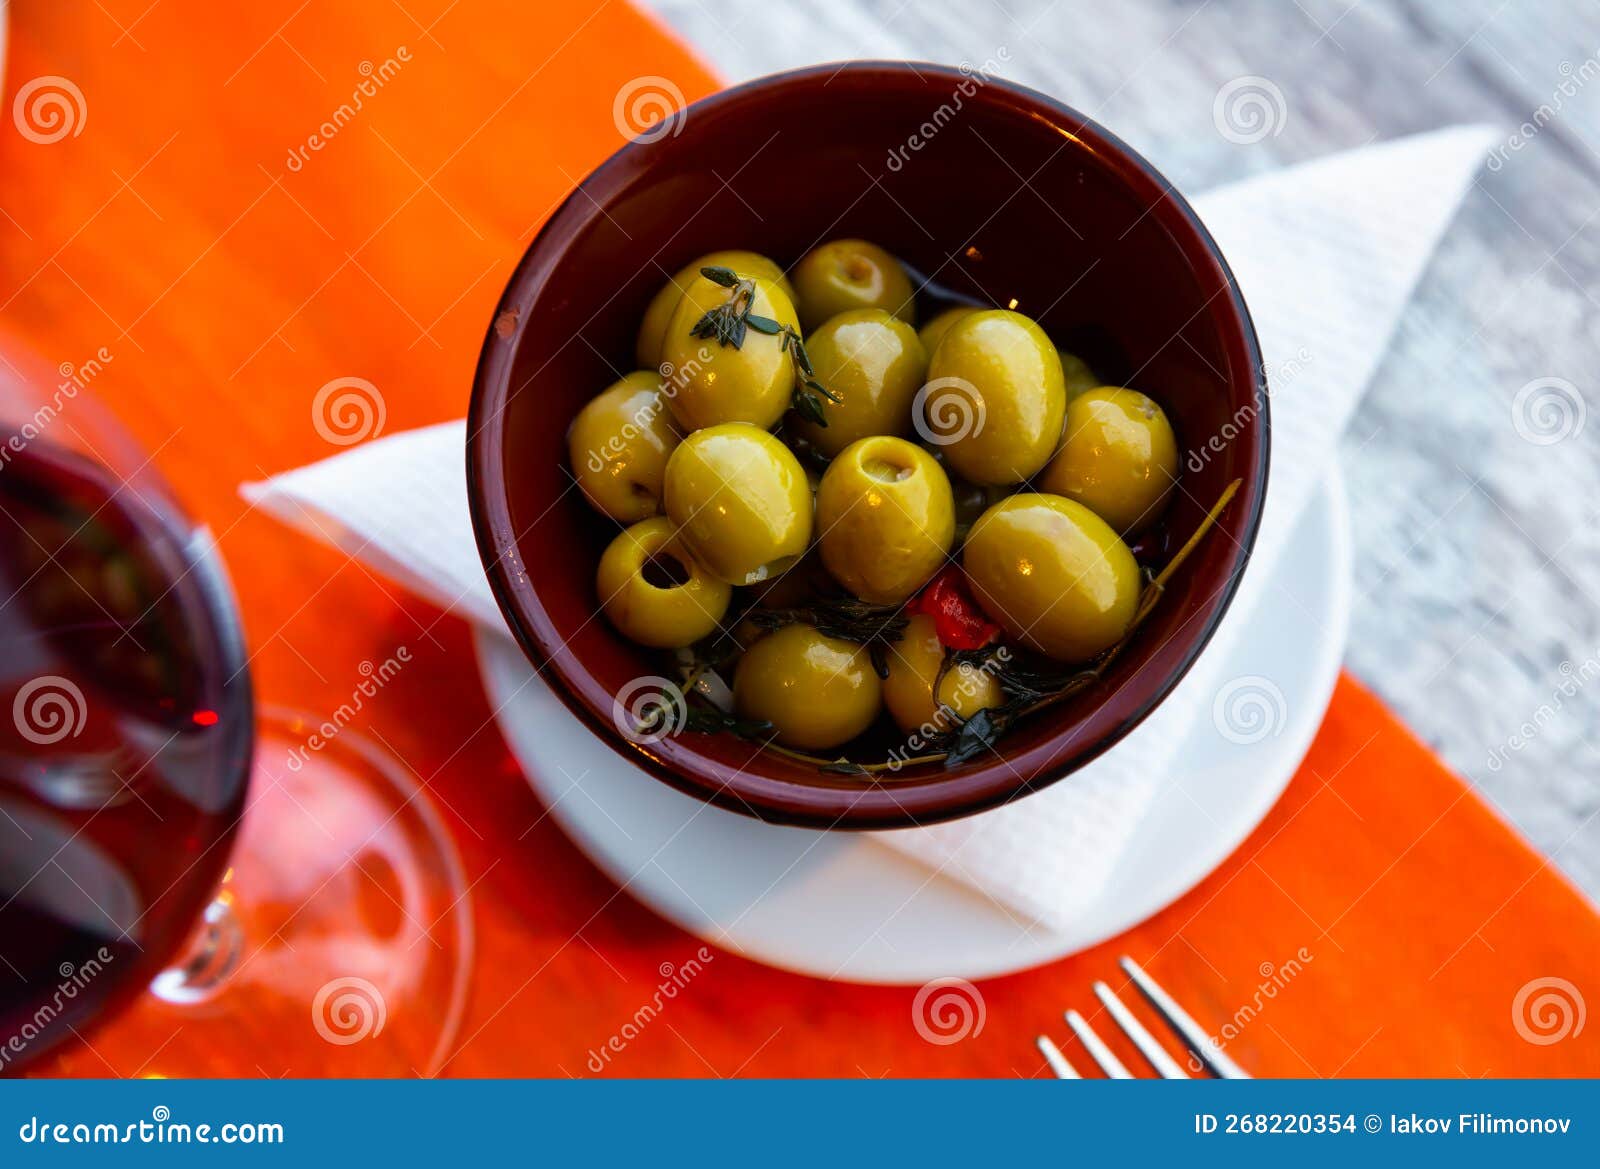 pickled green olives without stone - typical spanish tapas olivas verdes sin hueso